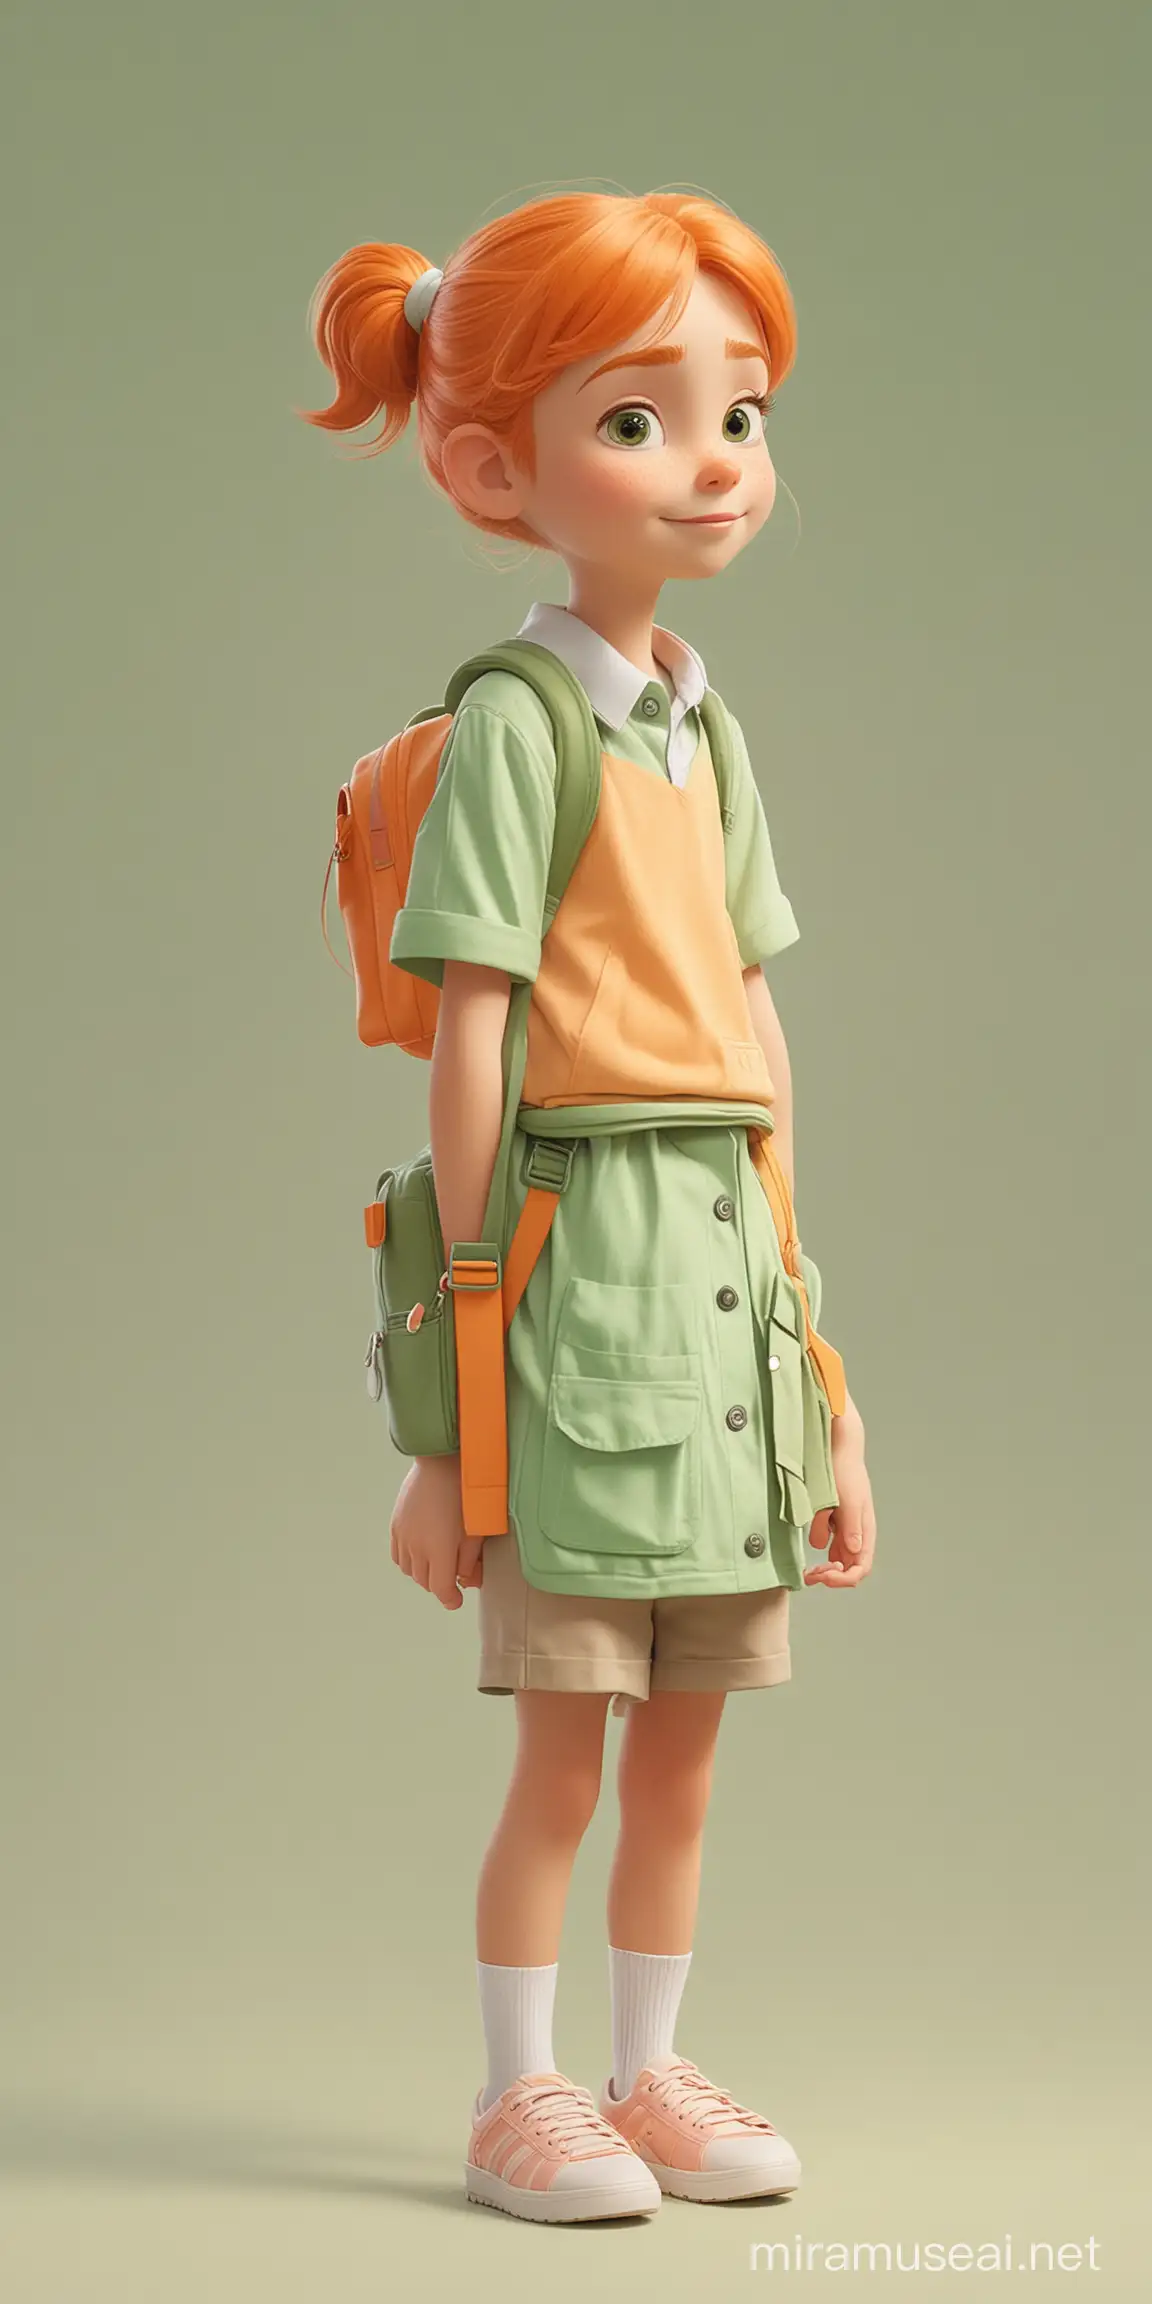 Child Heading to School in Disney Animation Style with Pastel Shades